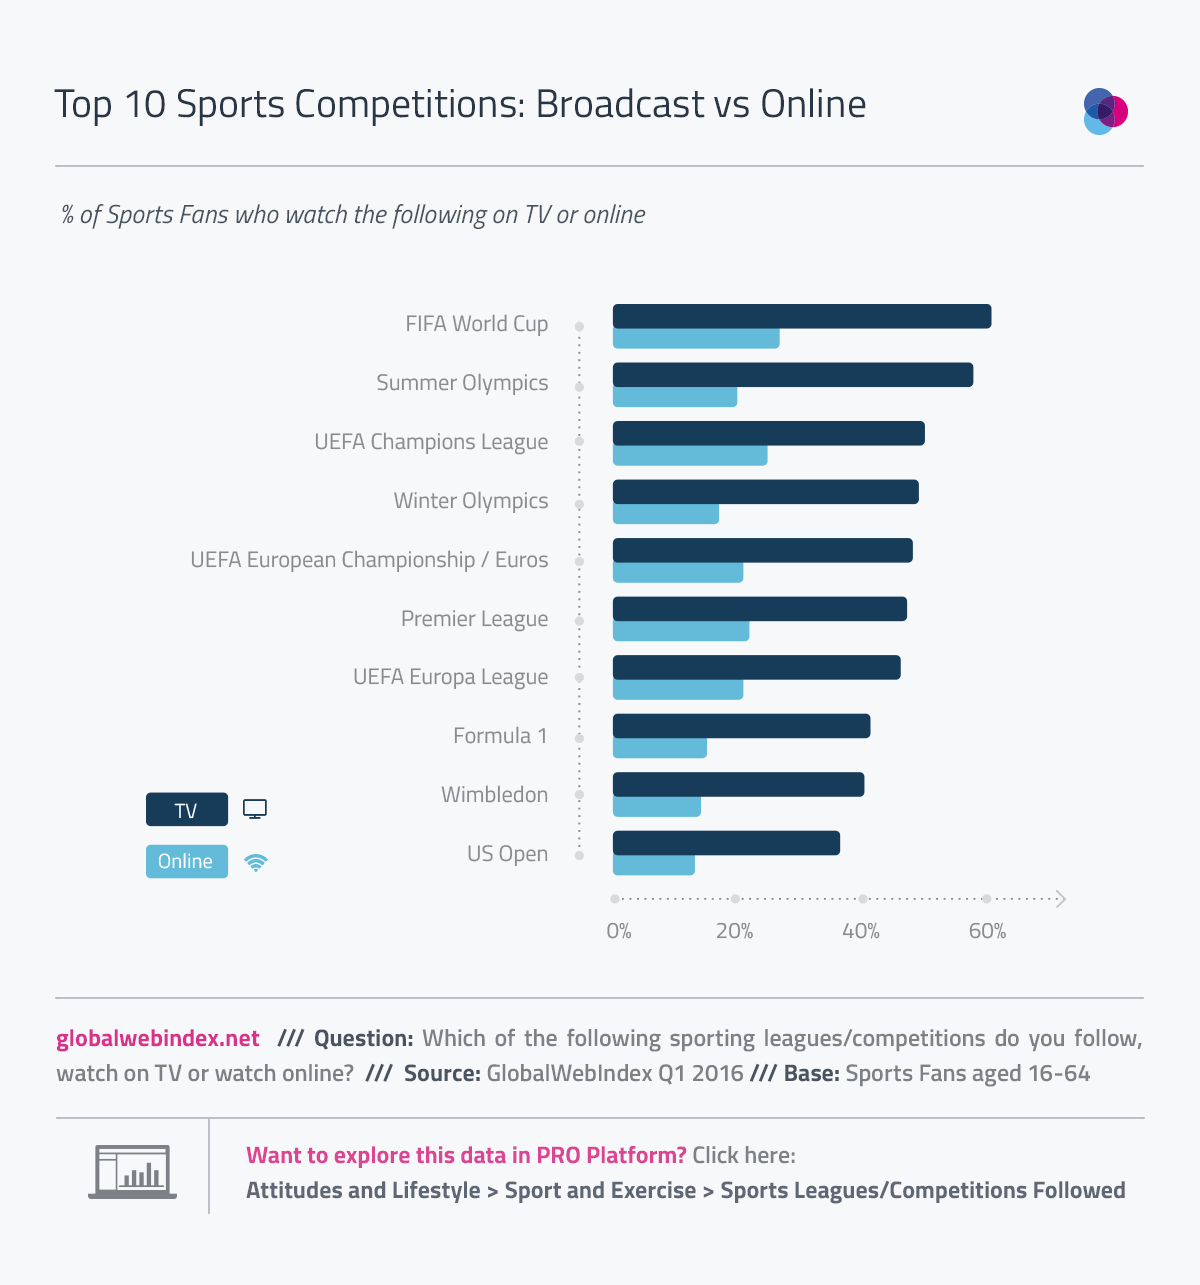 Is Social Media the Next Step for Sports Broadcasting?